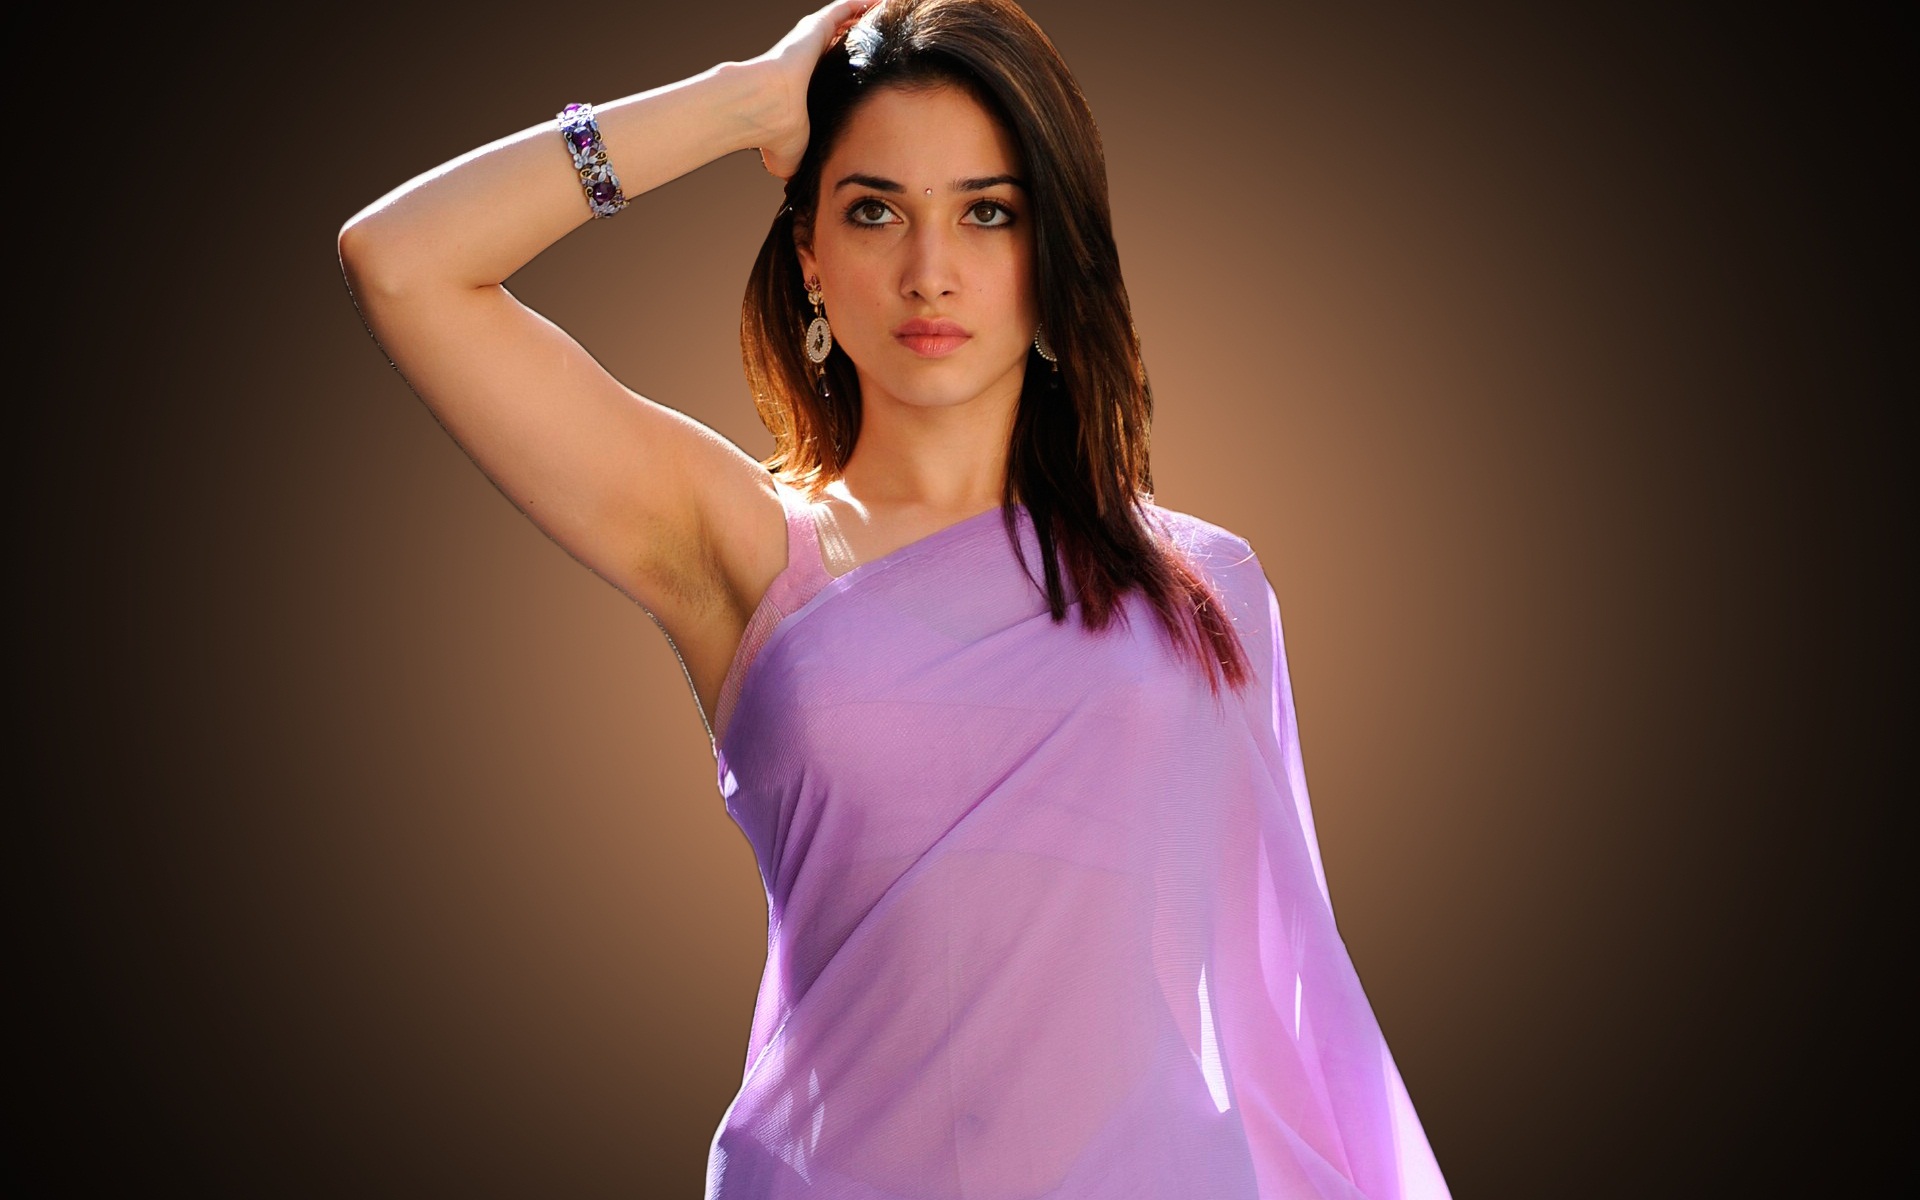 Tamanna Bhatia Wallpapers, Pictures, Images